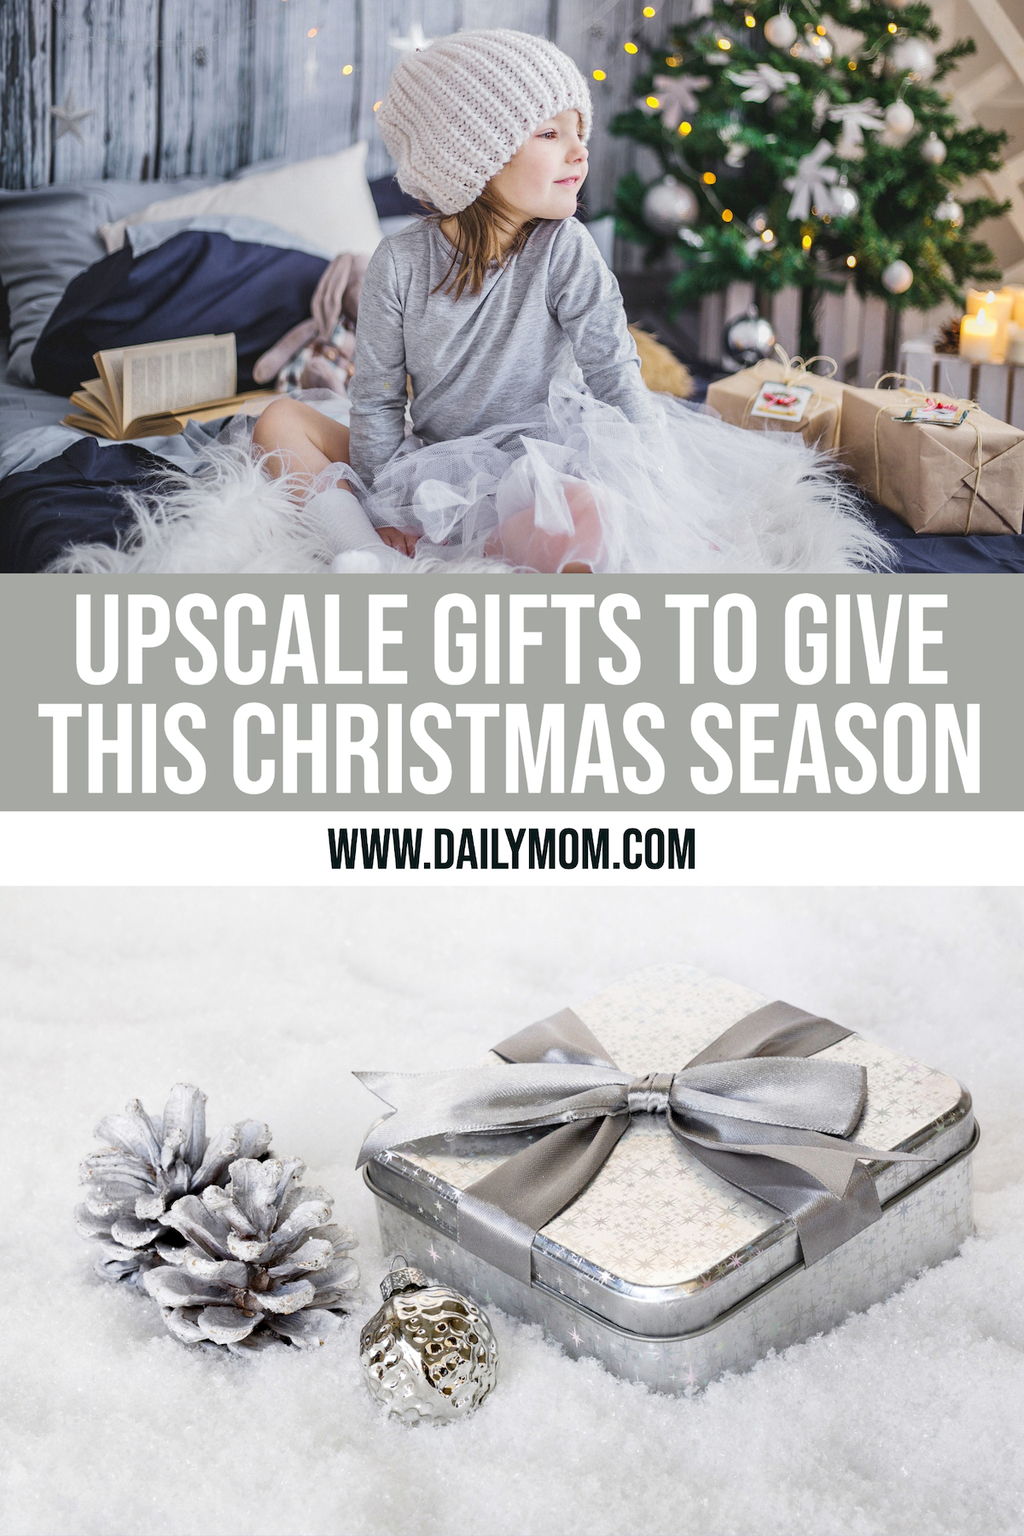 27 Awesome Upscale Gifts To Give This Christmas Season